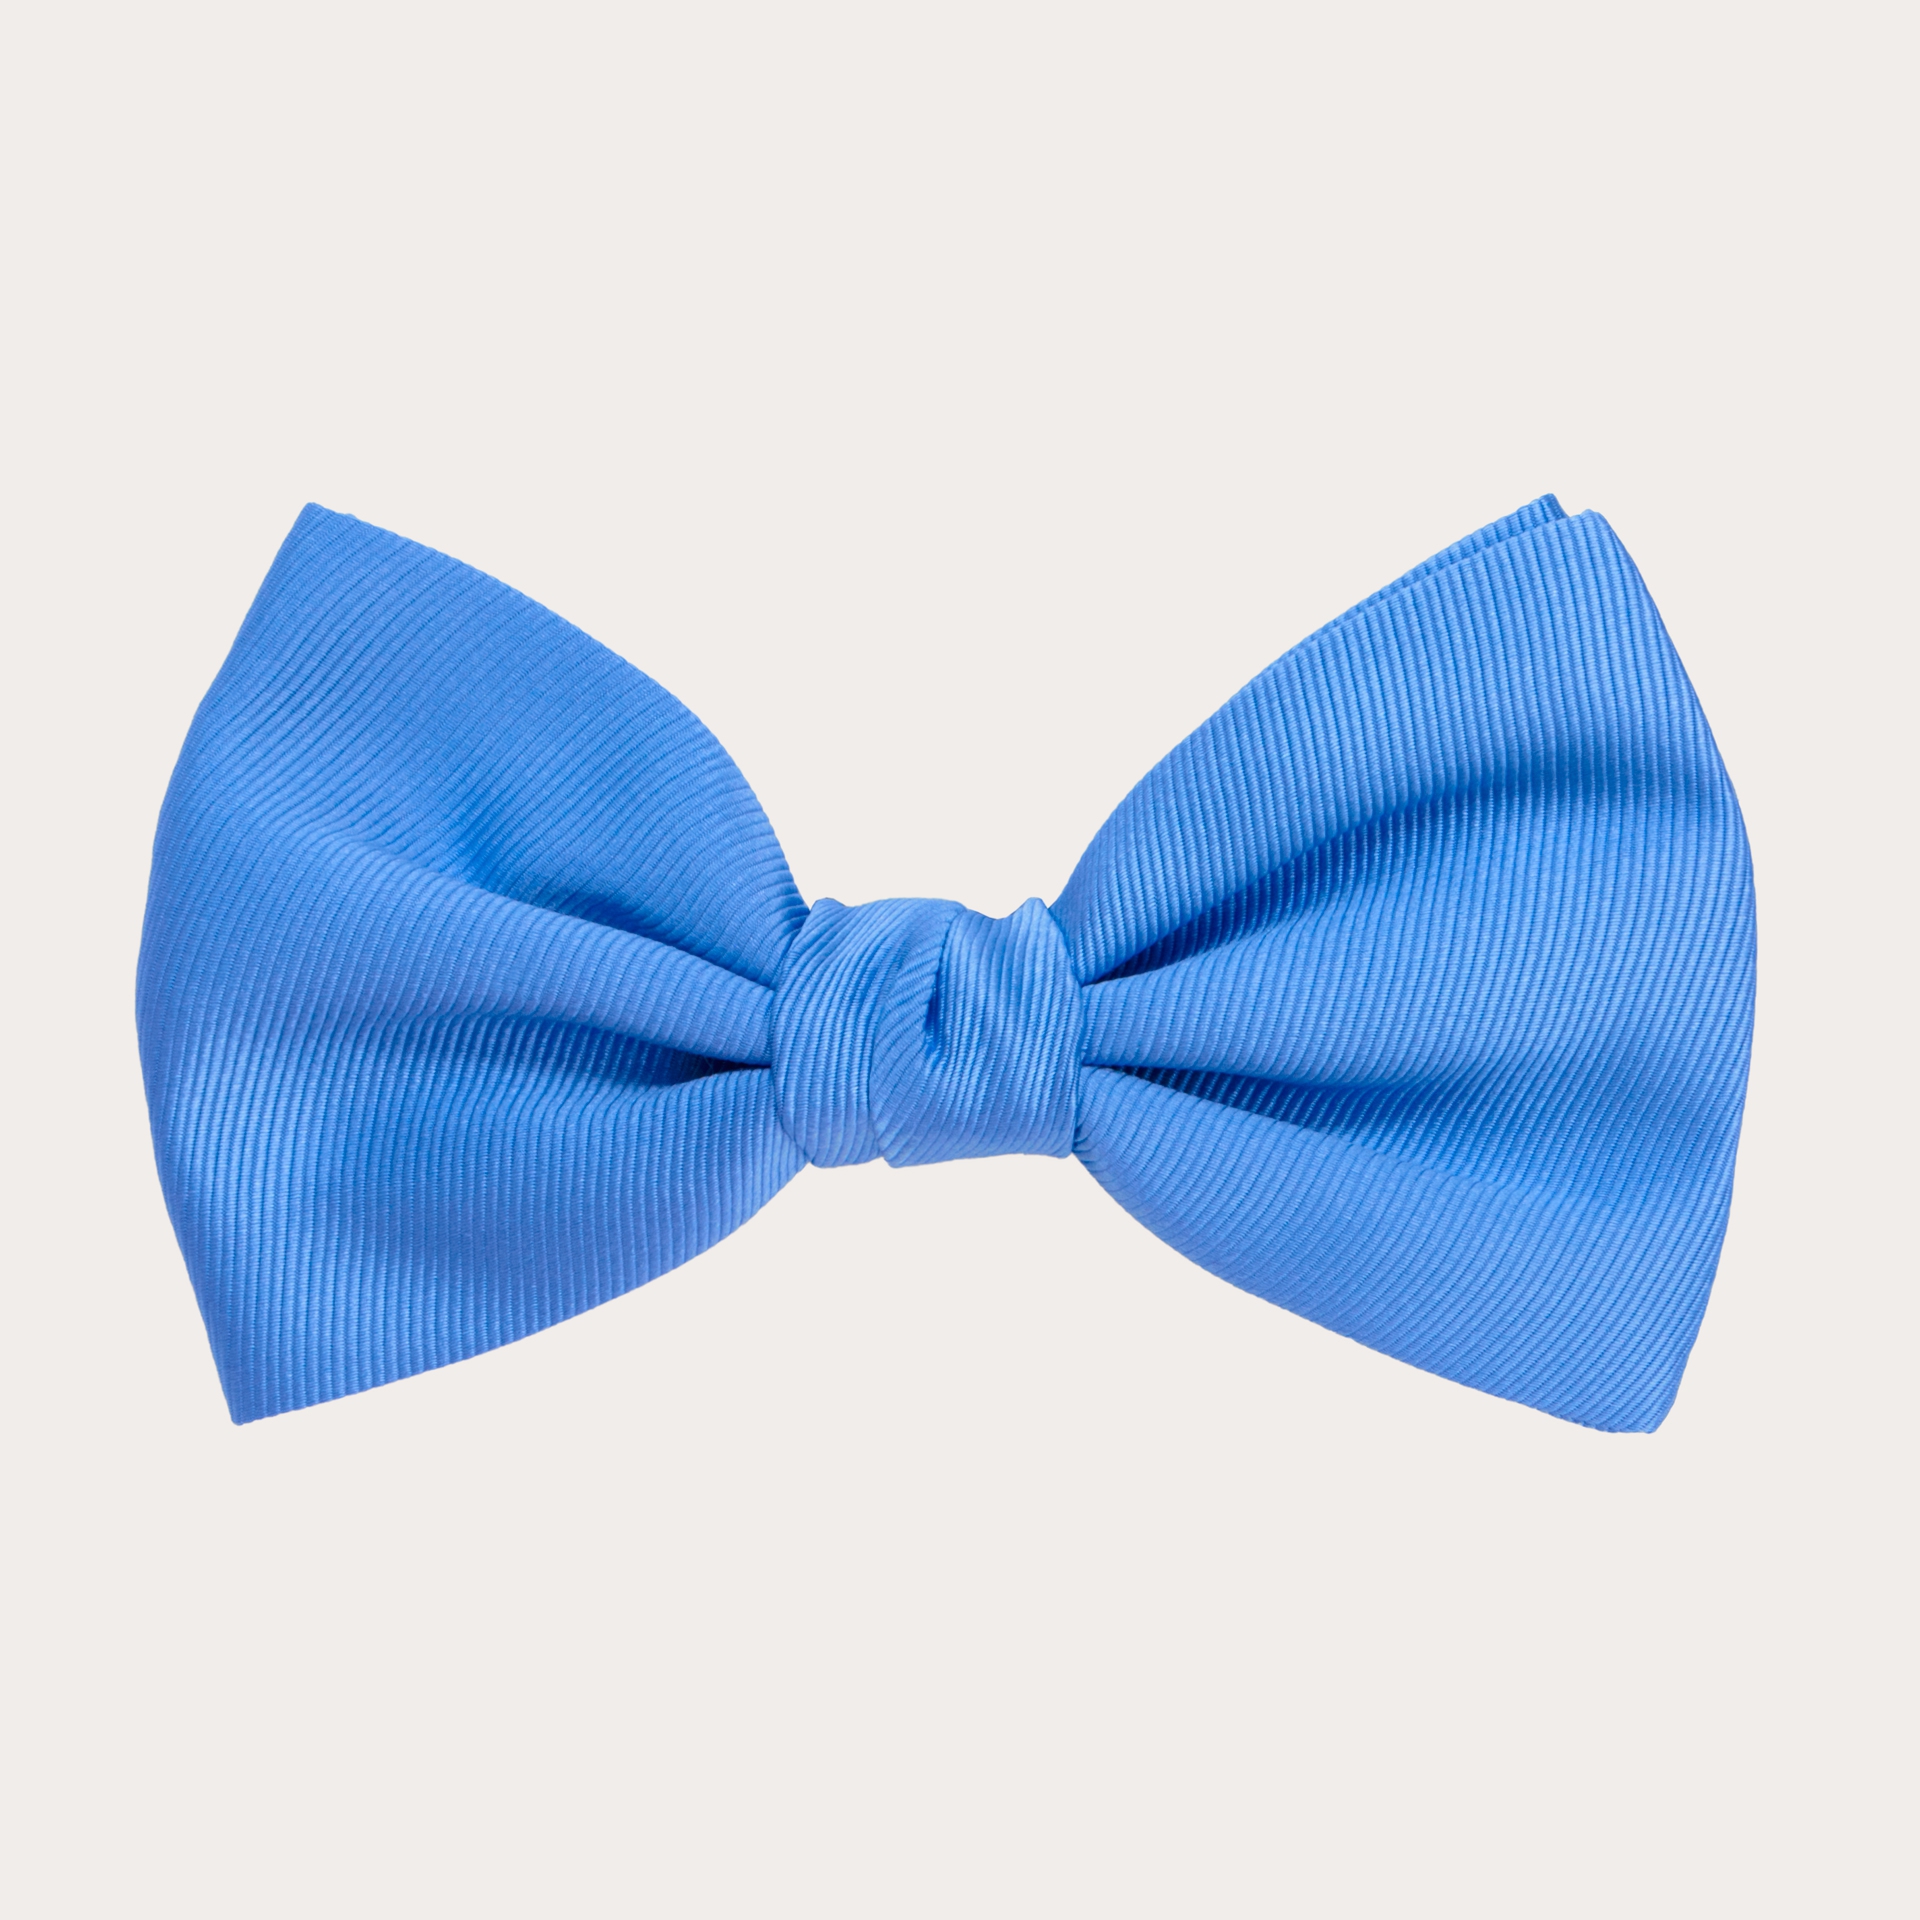 BRUCLE Classic bow tie in silk jacquard, light blue